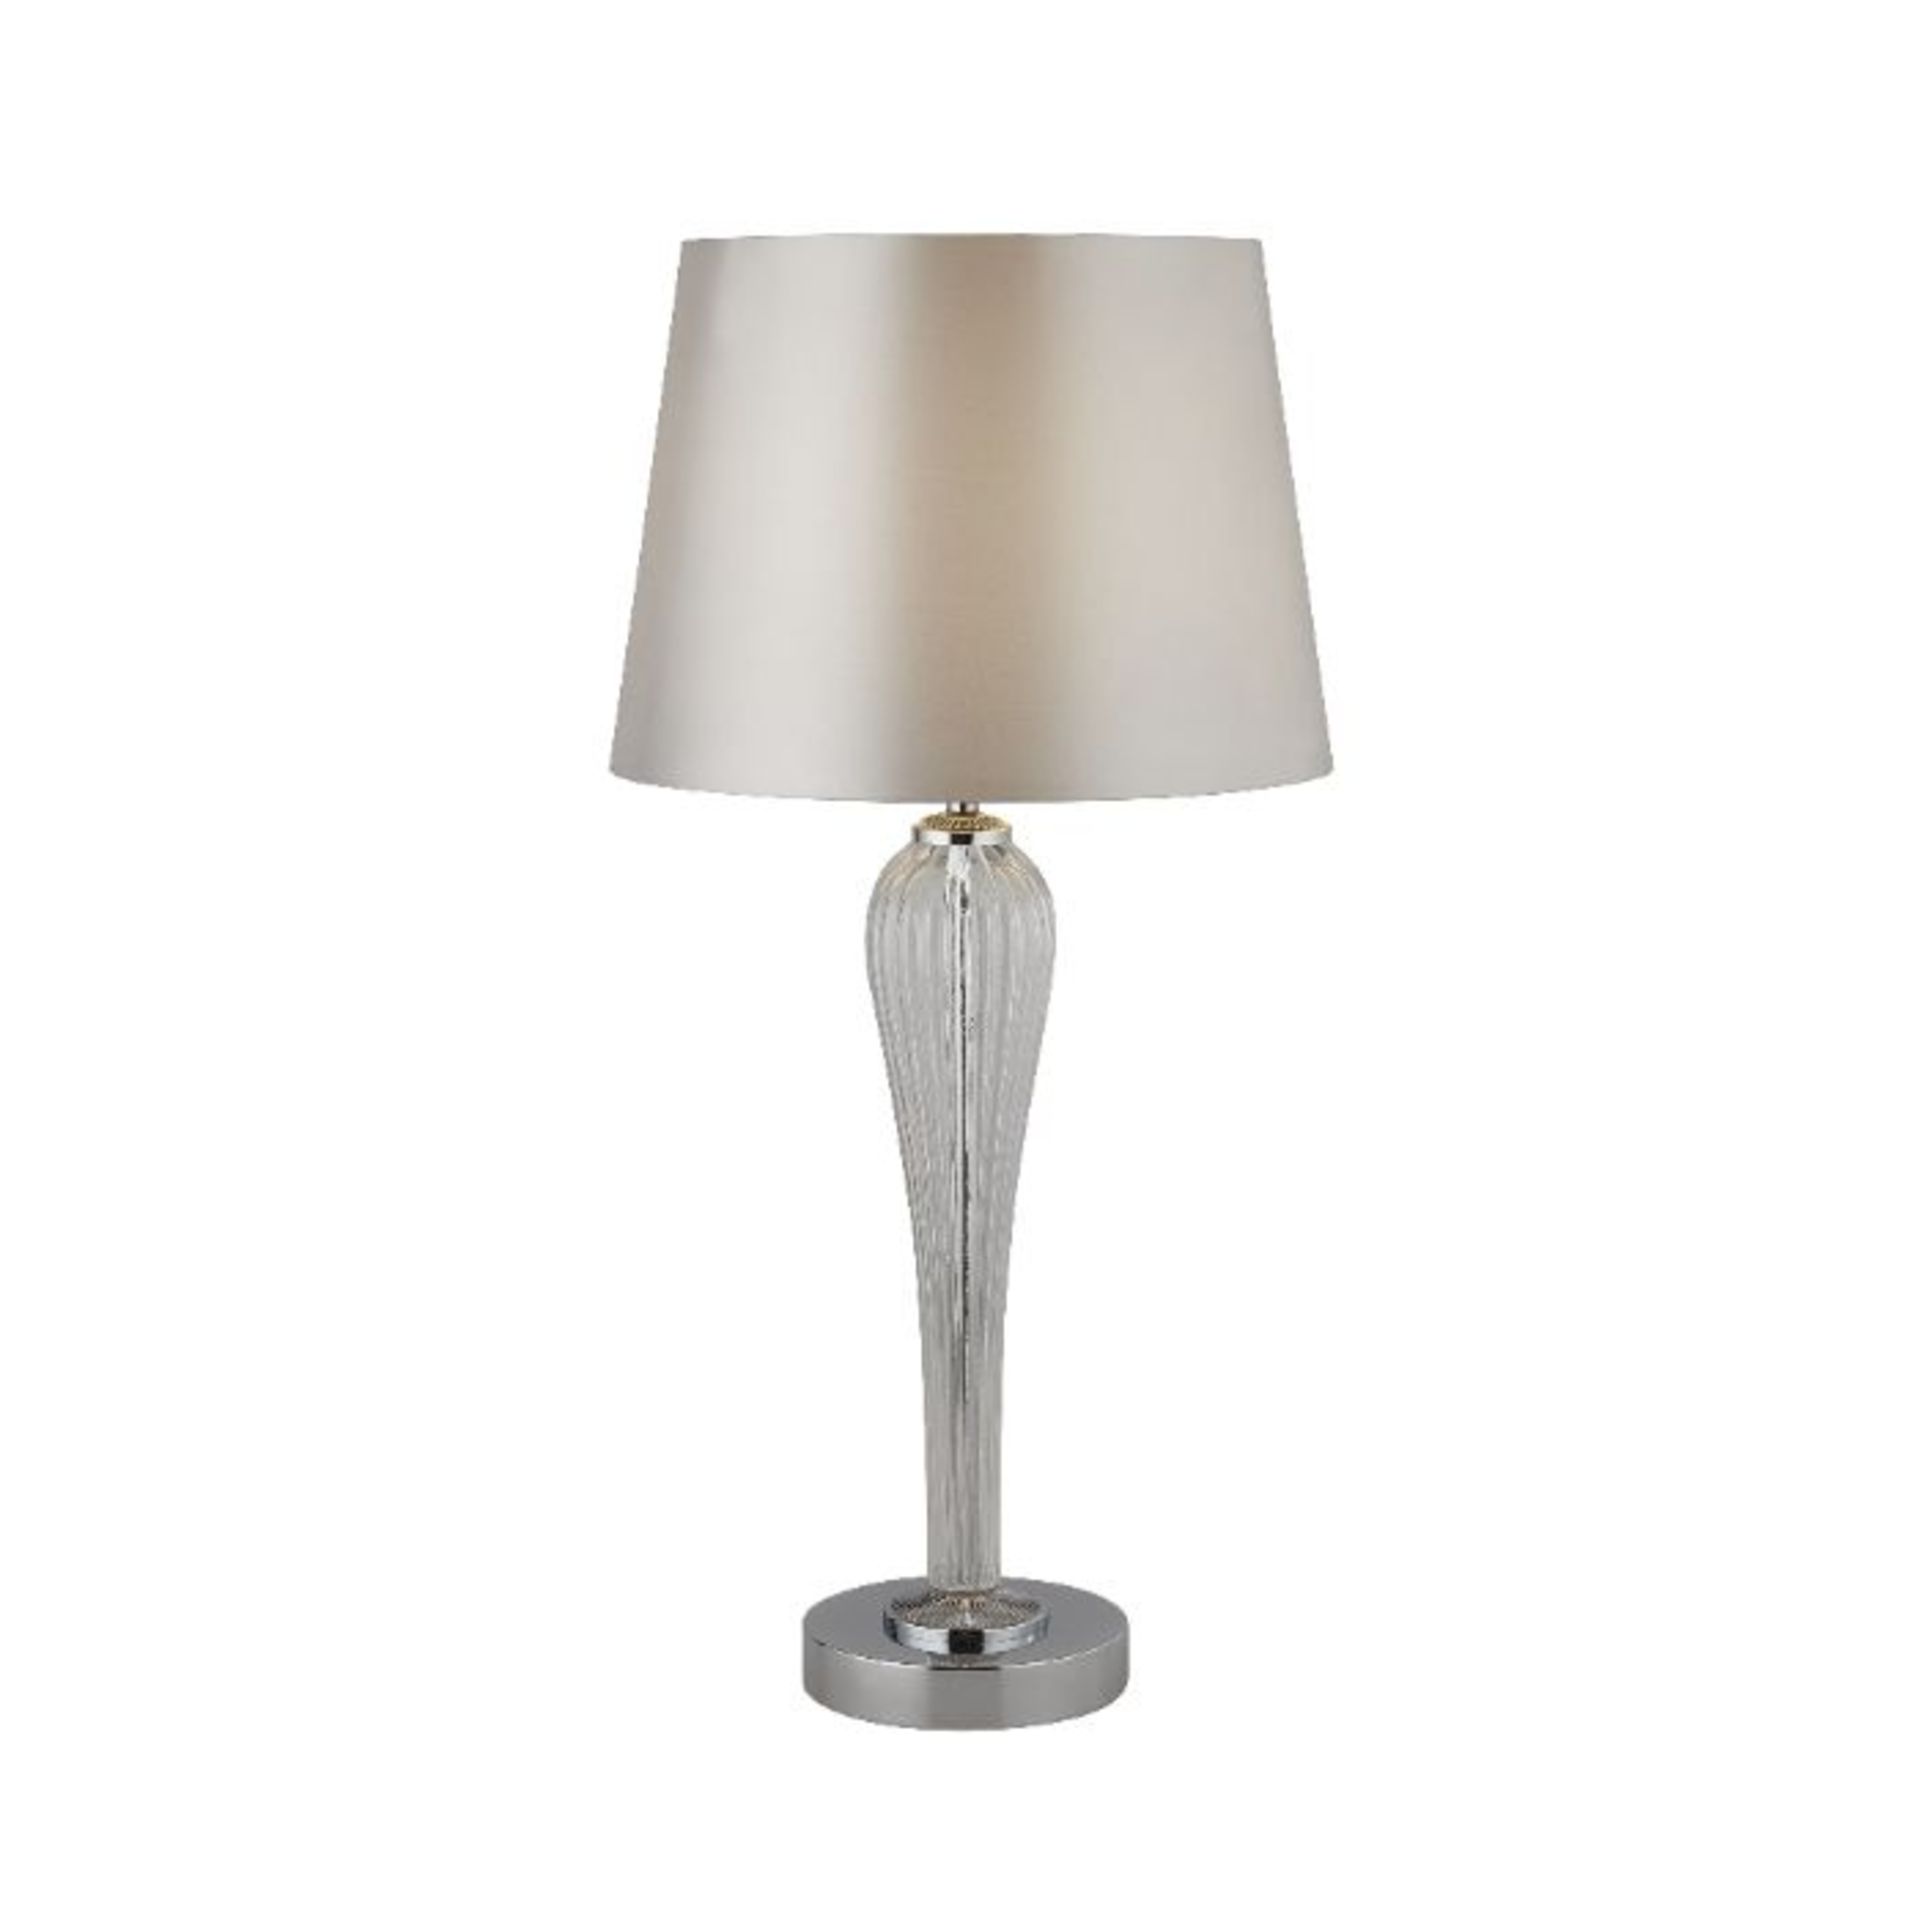 BRAND NEW ART DECO STYLE TABLE LAMP, GLASS BASE, SILVER FABRIC SHADE. 56CM HIGH. 60W. - 56cm high